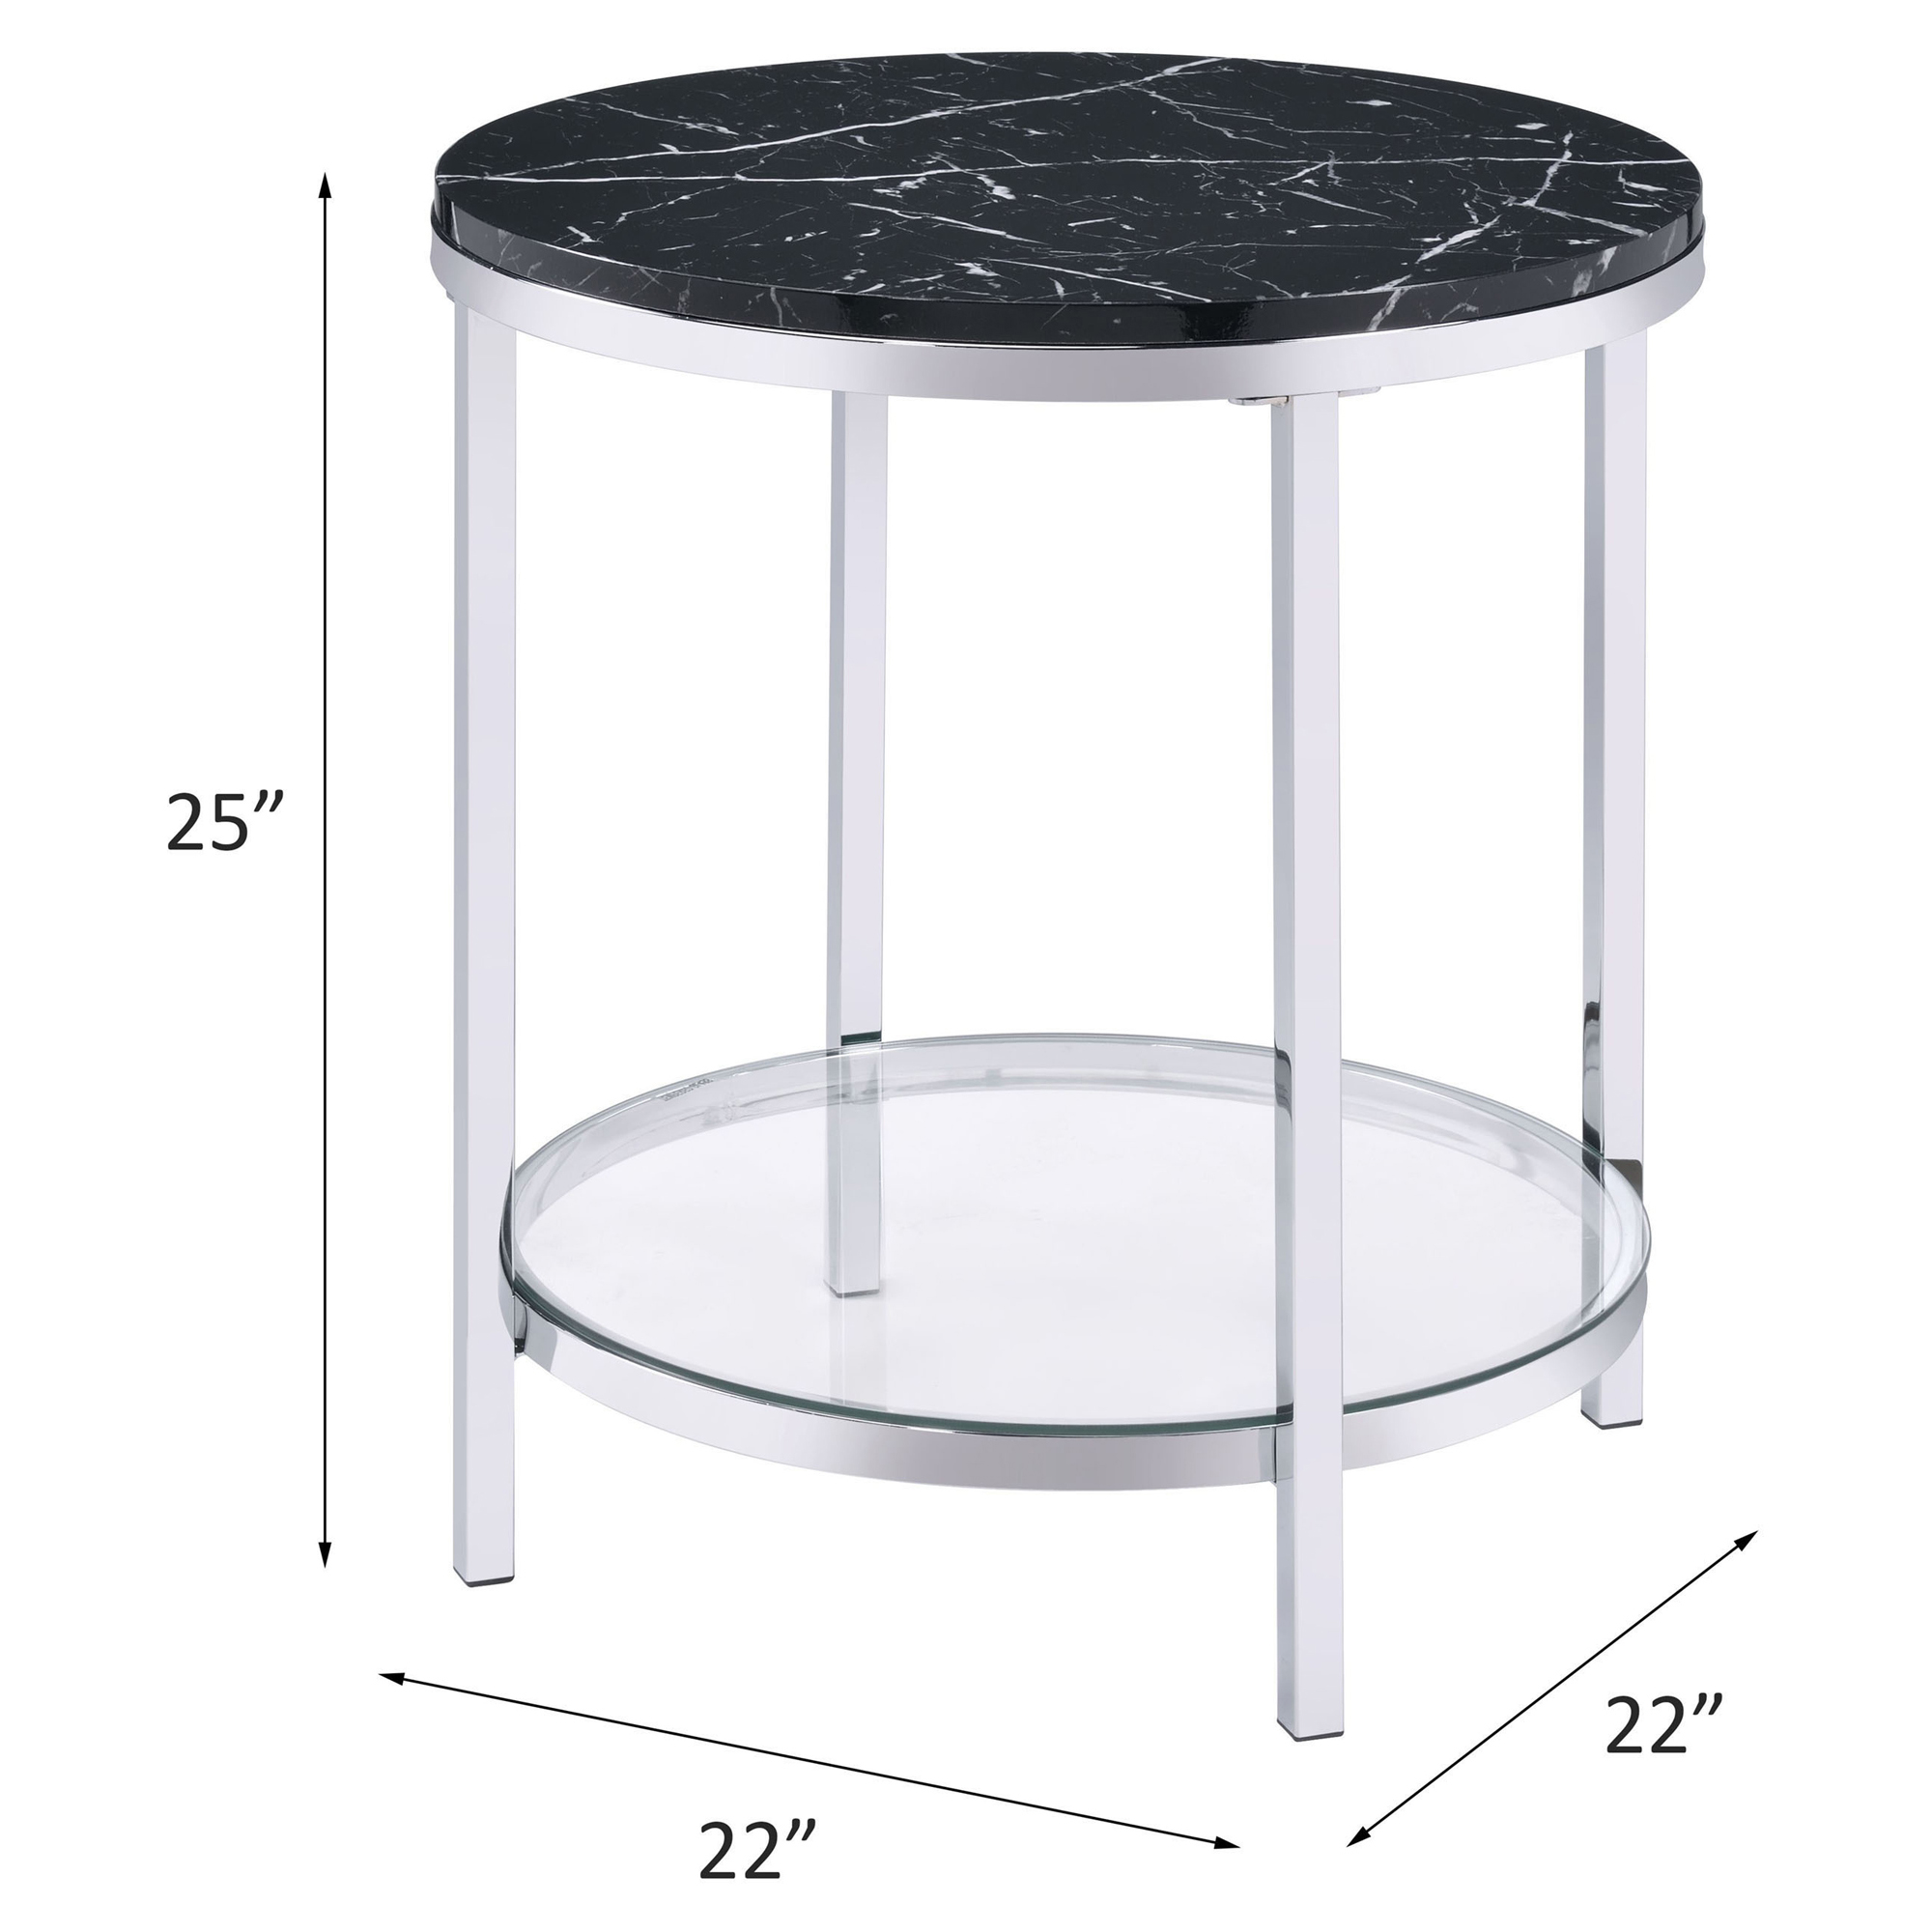 ACME Virlana Round End Table in Black and Chrome - image 5 of 5